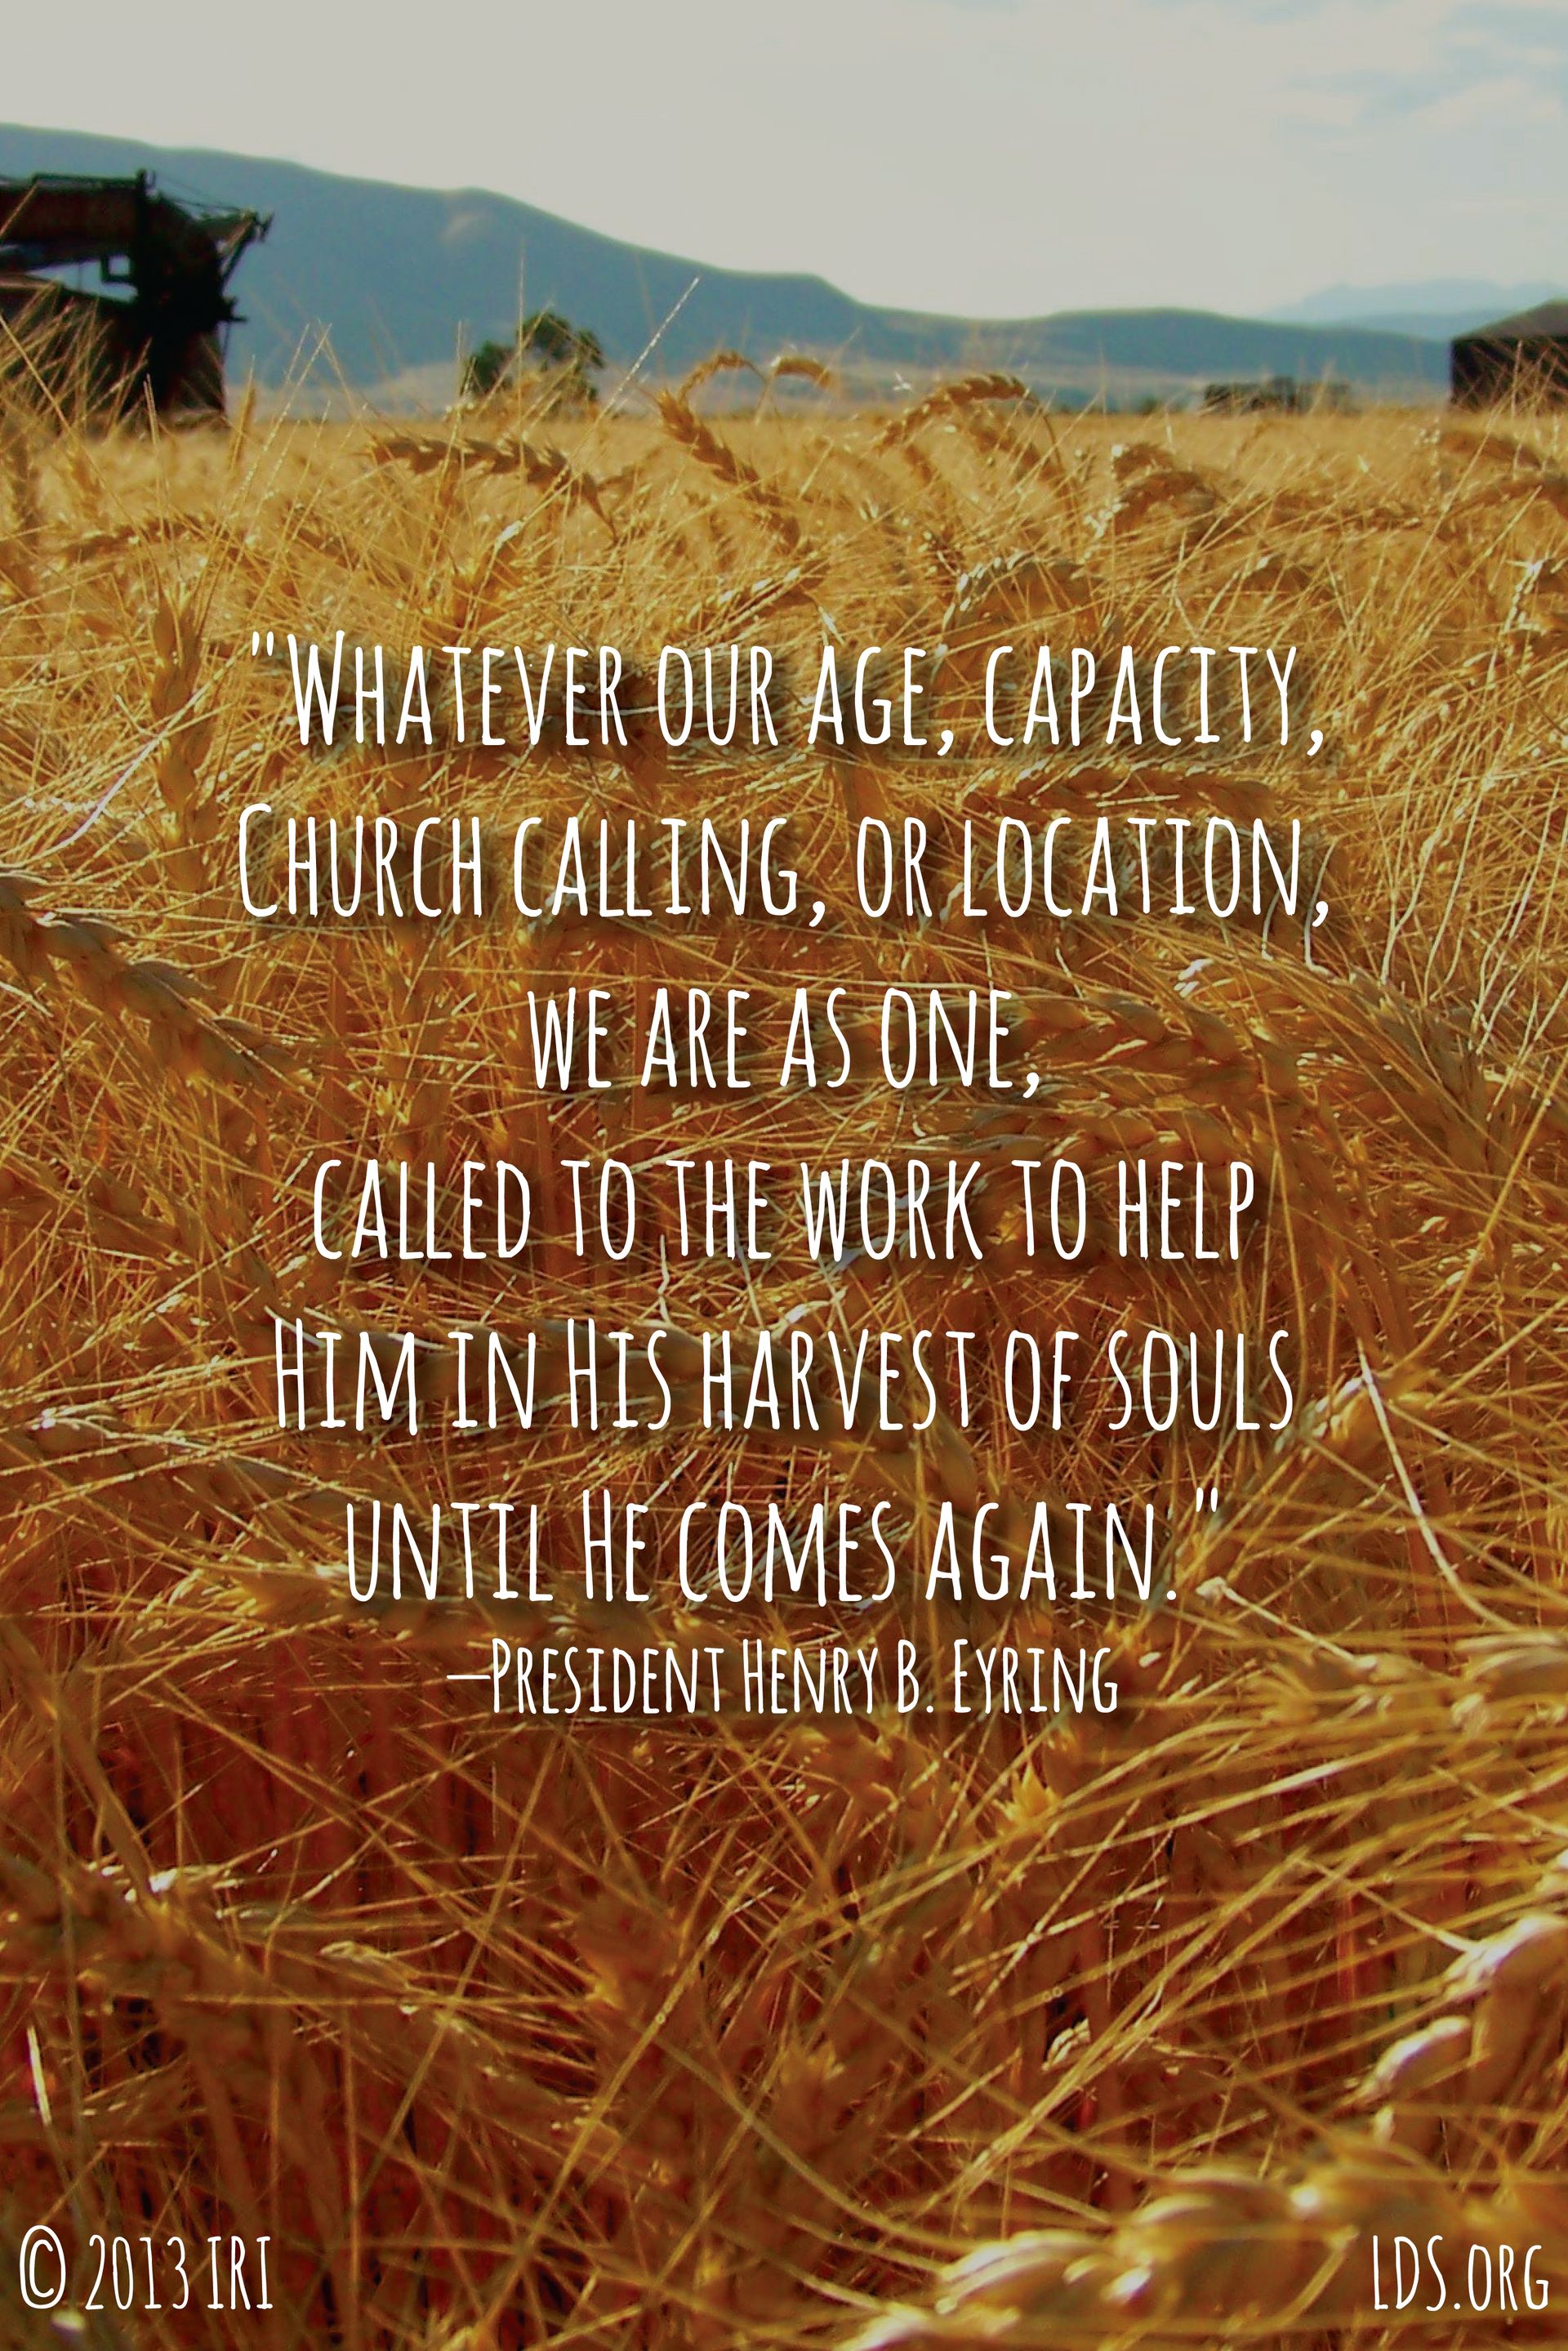 “Whatever our age, capacity, Church calling, or location, we are as one, called to the work to help Him in His harvest of souls until He comes again.”—President Henry B. Eyring, “We Are One” © undefined ipCode 1.